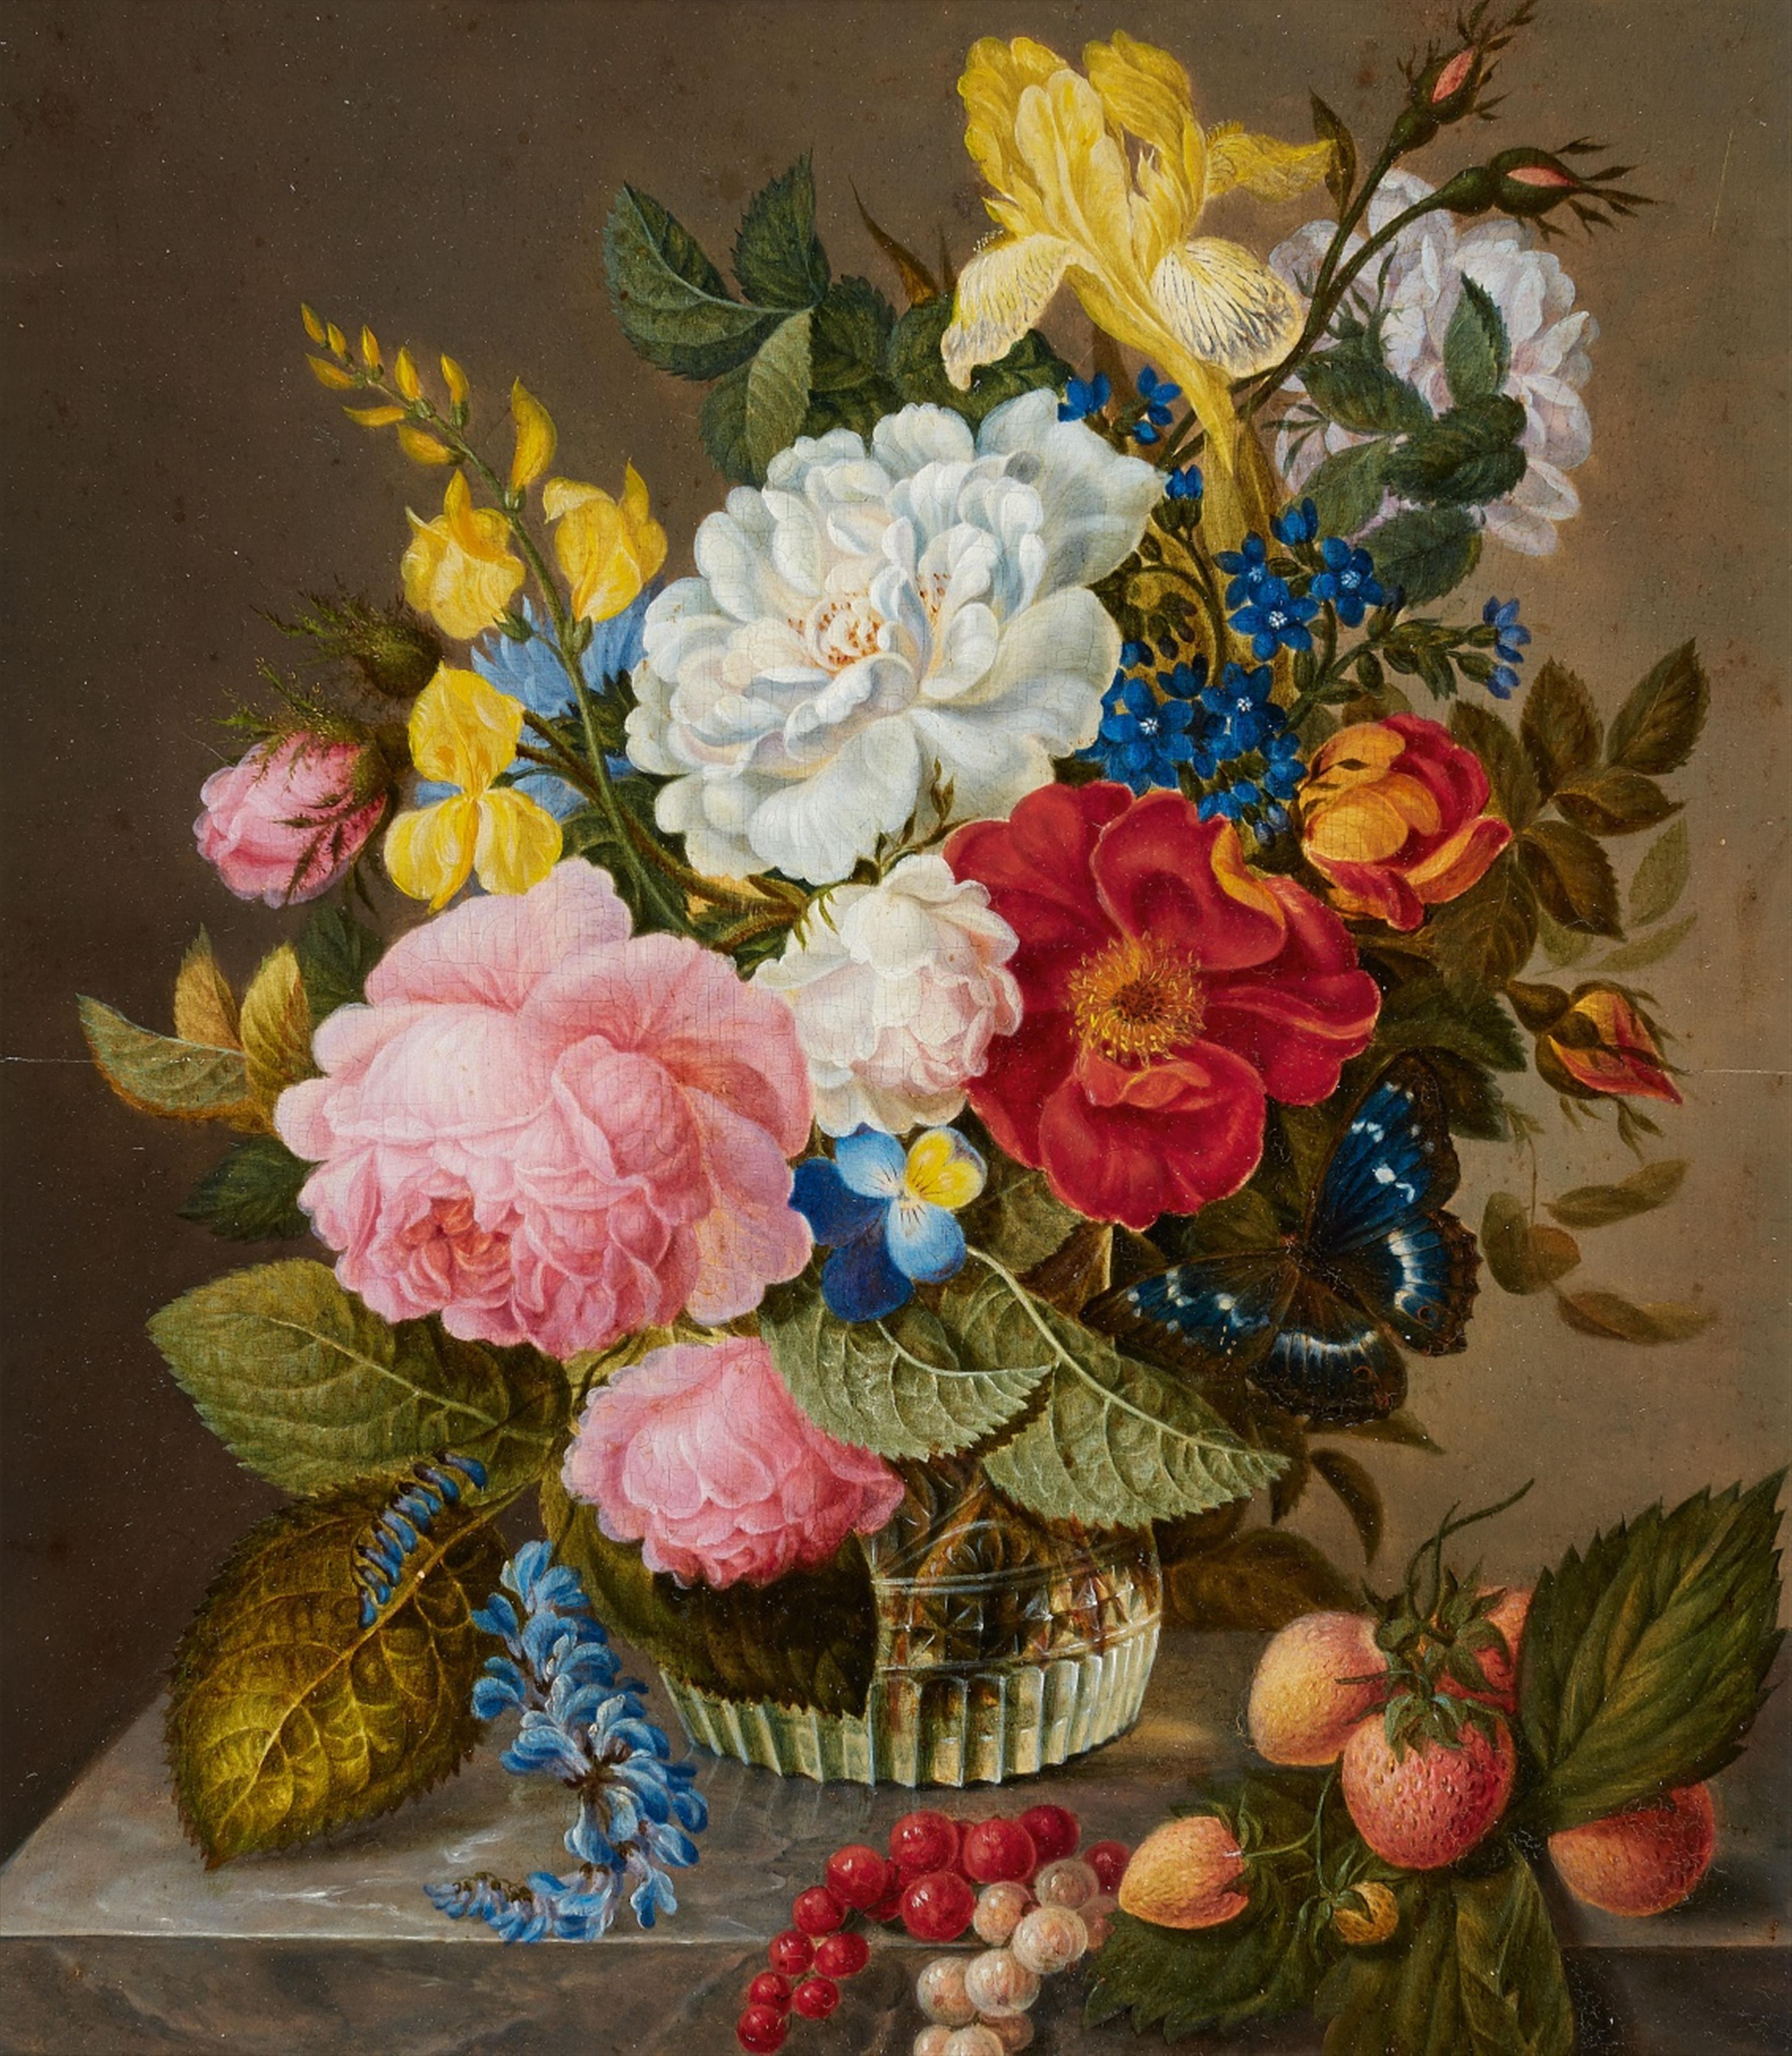 Adelheid Friedericke Braun - Roses, Iris, Forget-me-nots, Tufted Pansy and other Flowers in a Glass Vase - image-1